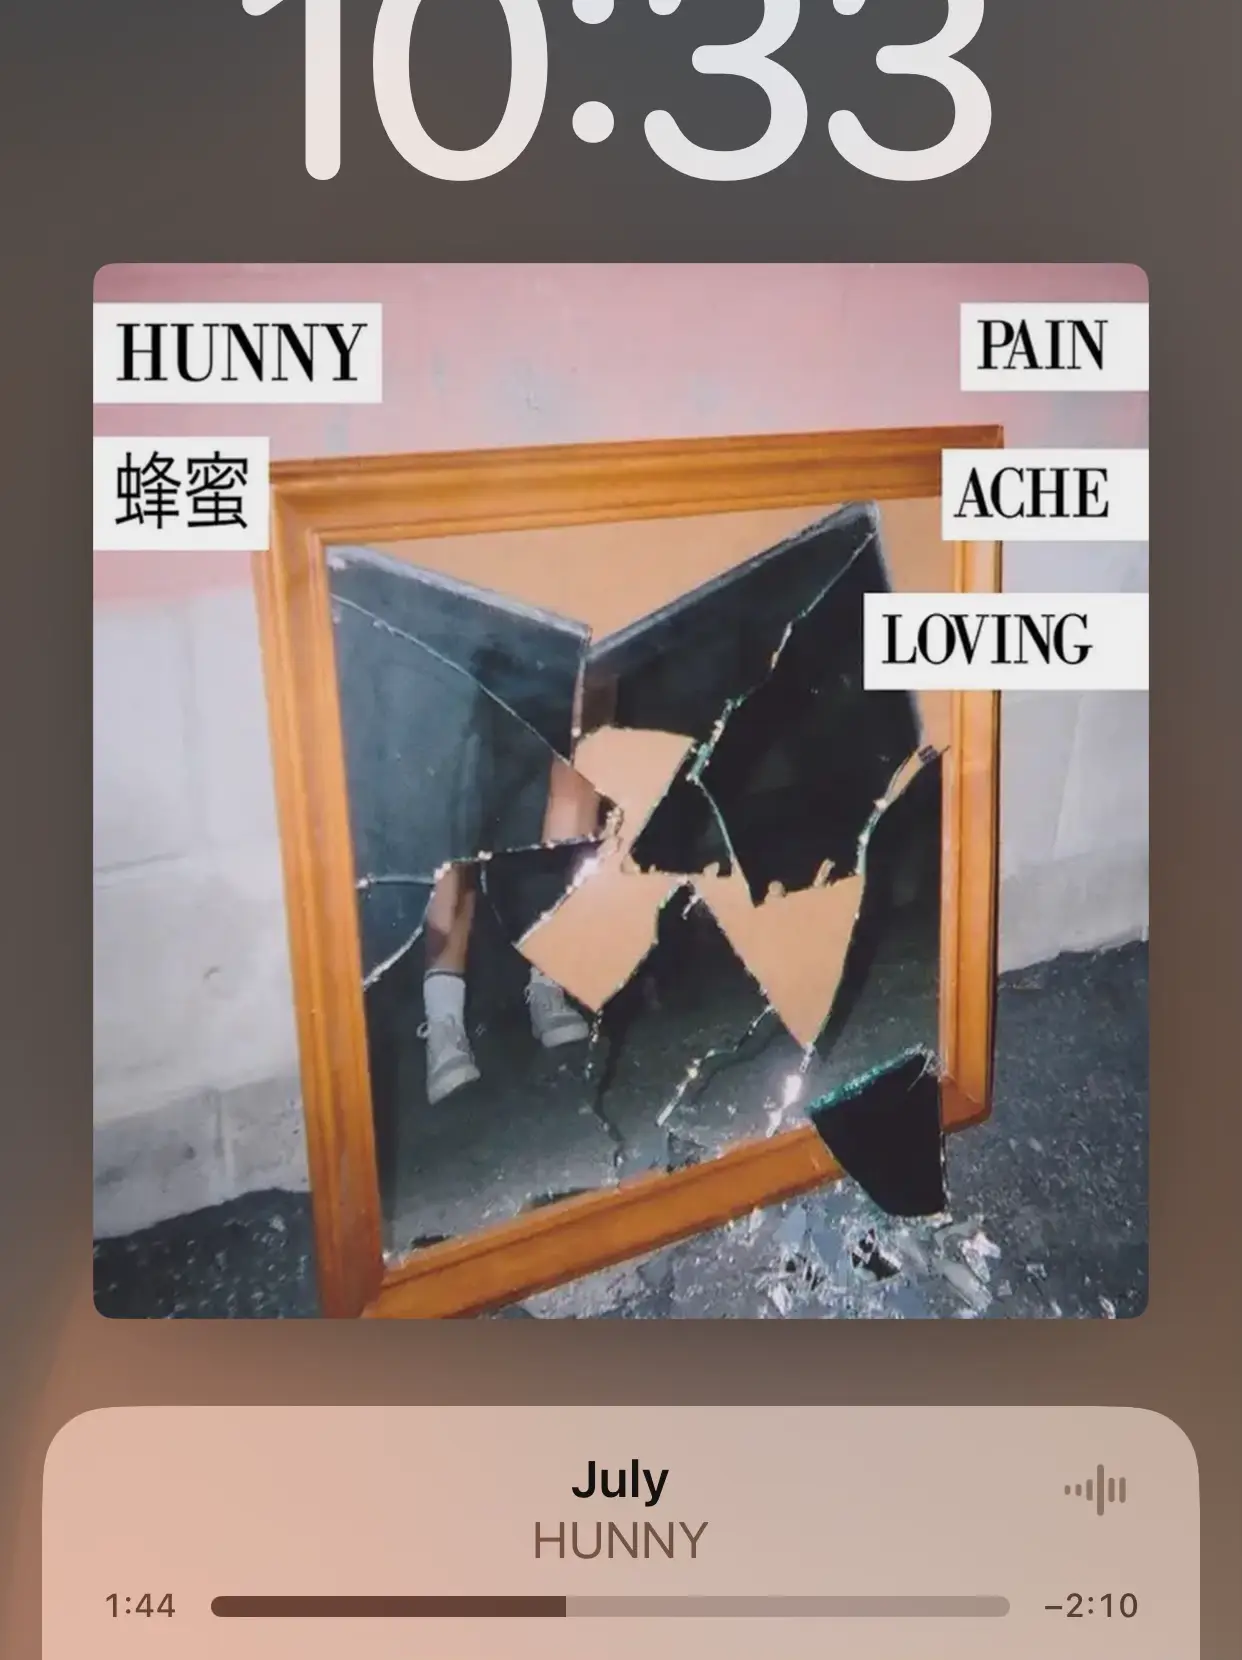  A picture of a mirror with the words "Pain Honey Ache Loving" written on it.